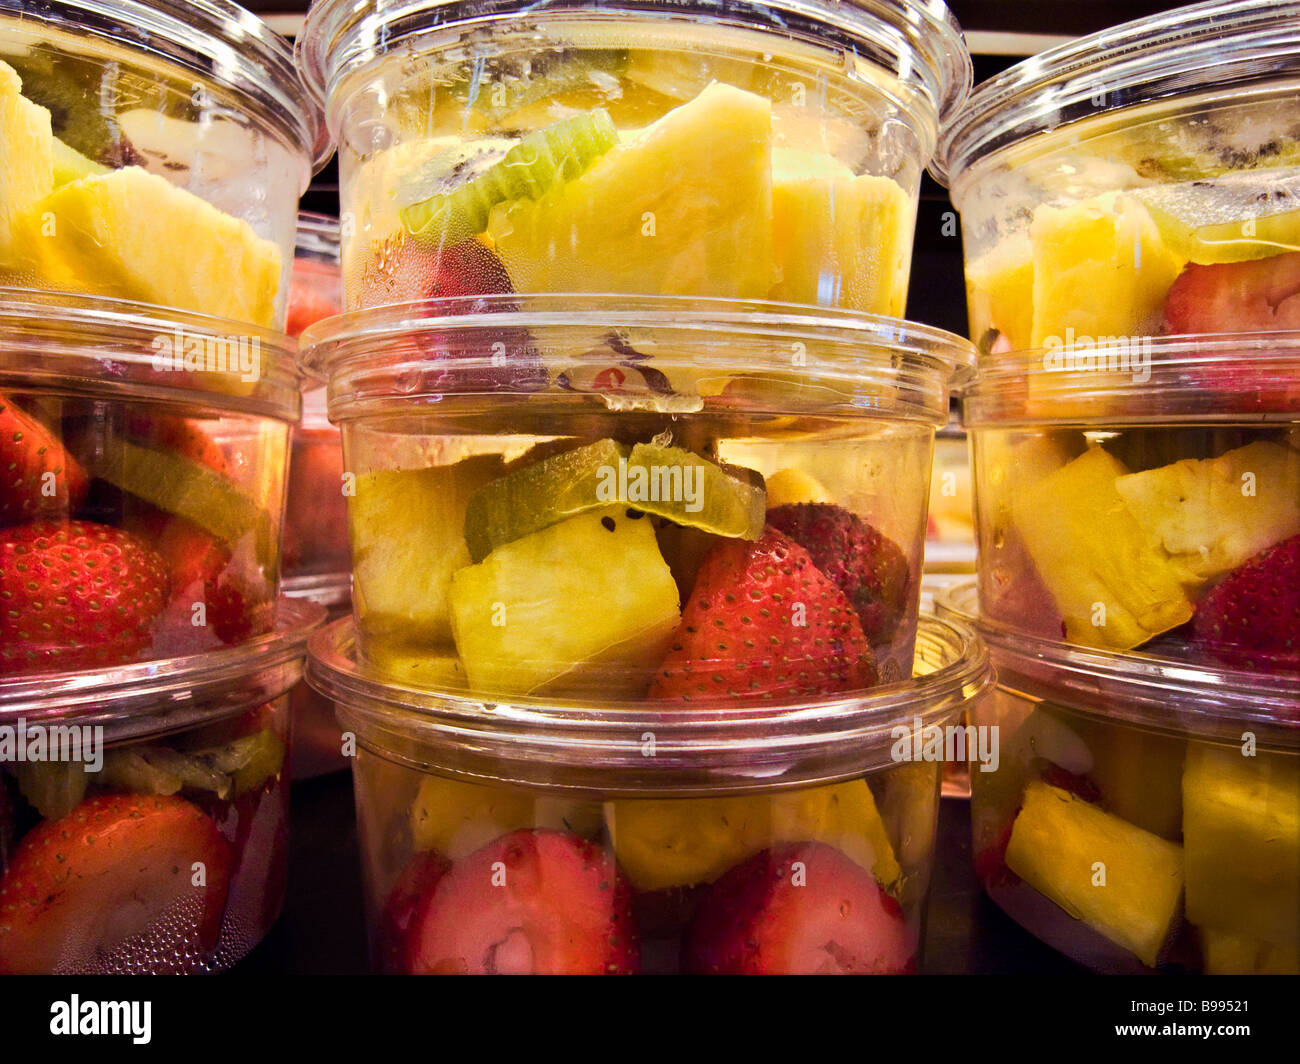 https://c8.alamy.com/comp/B99521/fruit-salad-in-clear-plastic-containers-B99521.jpg